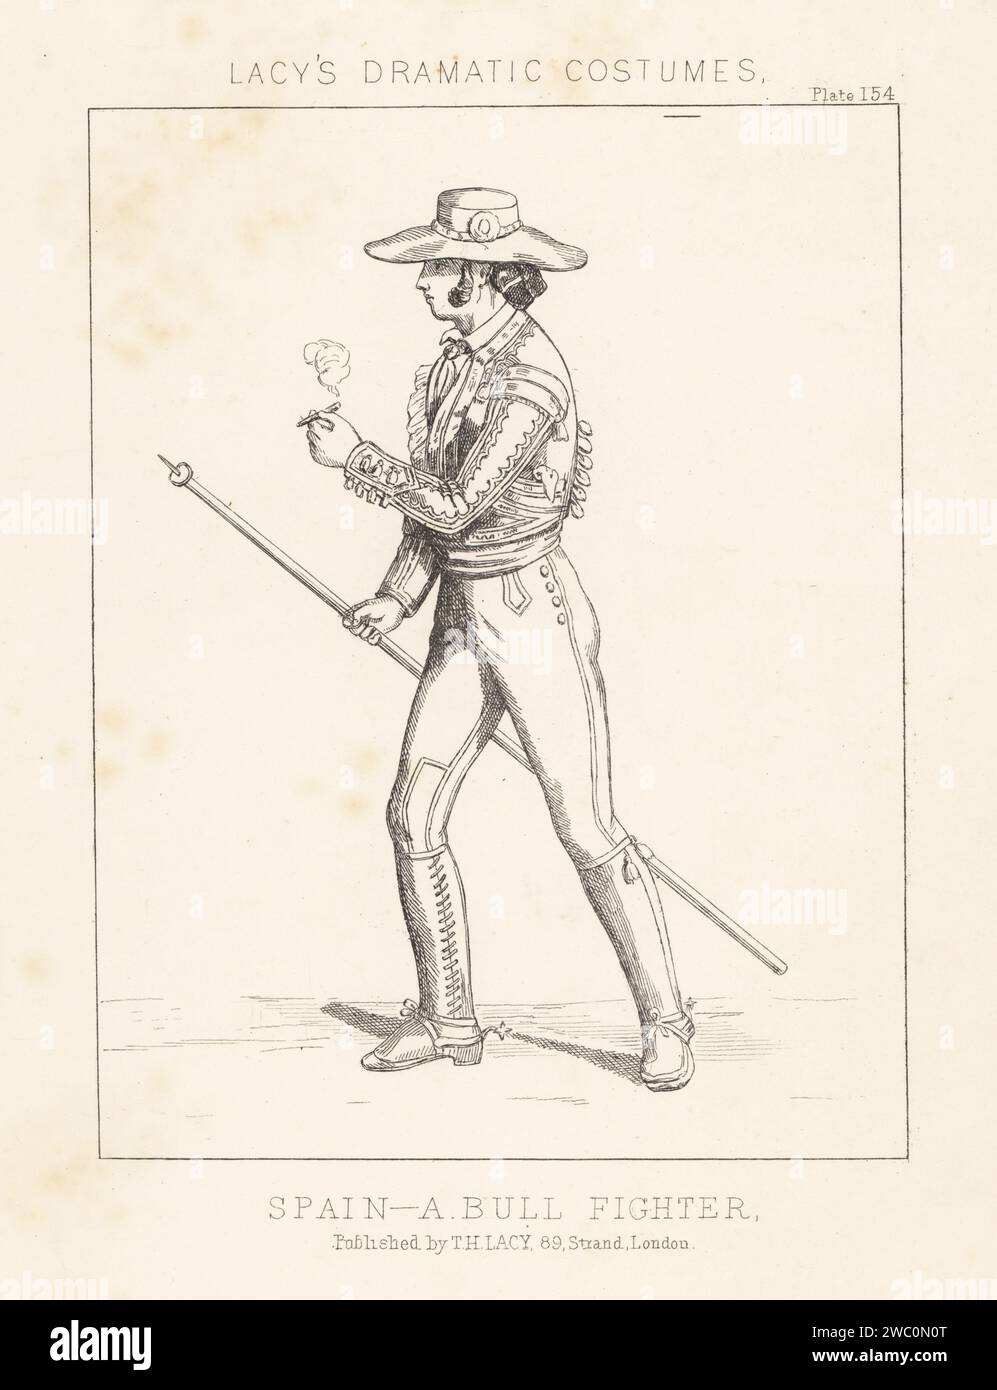 Dismounted picador, Spain, 19th century. Bullfighter in wide-brim hat, bolero jacket, breeches, gaiters and spurs, with lance, smoking a cigar. Costume of a bull-fighter, Spain. Lithograph from Thomas Hailes Lacy's Male Costumes, Historical, National and Dramatic in 200 Plates, London, 1865. Lacy (1809-1873) was a British actor, playwright, theatrical manager and publisher. Stock Photo